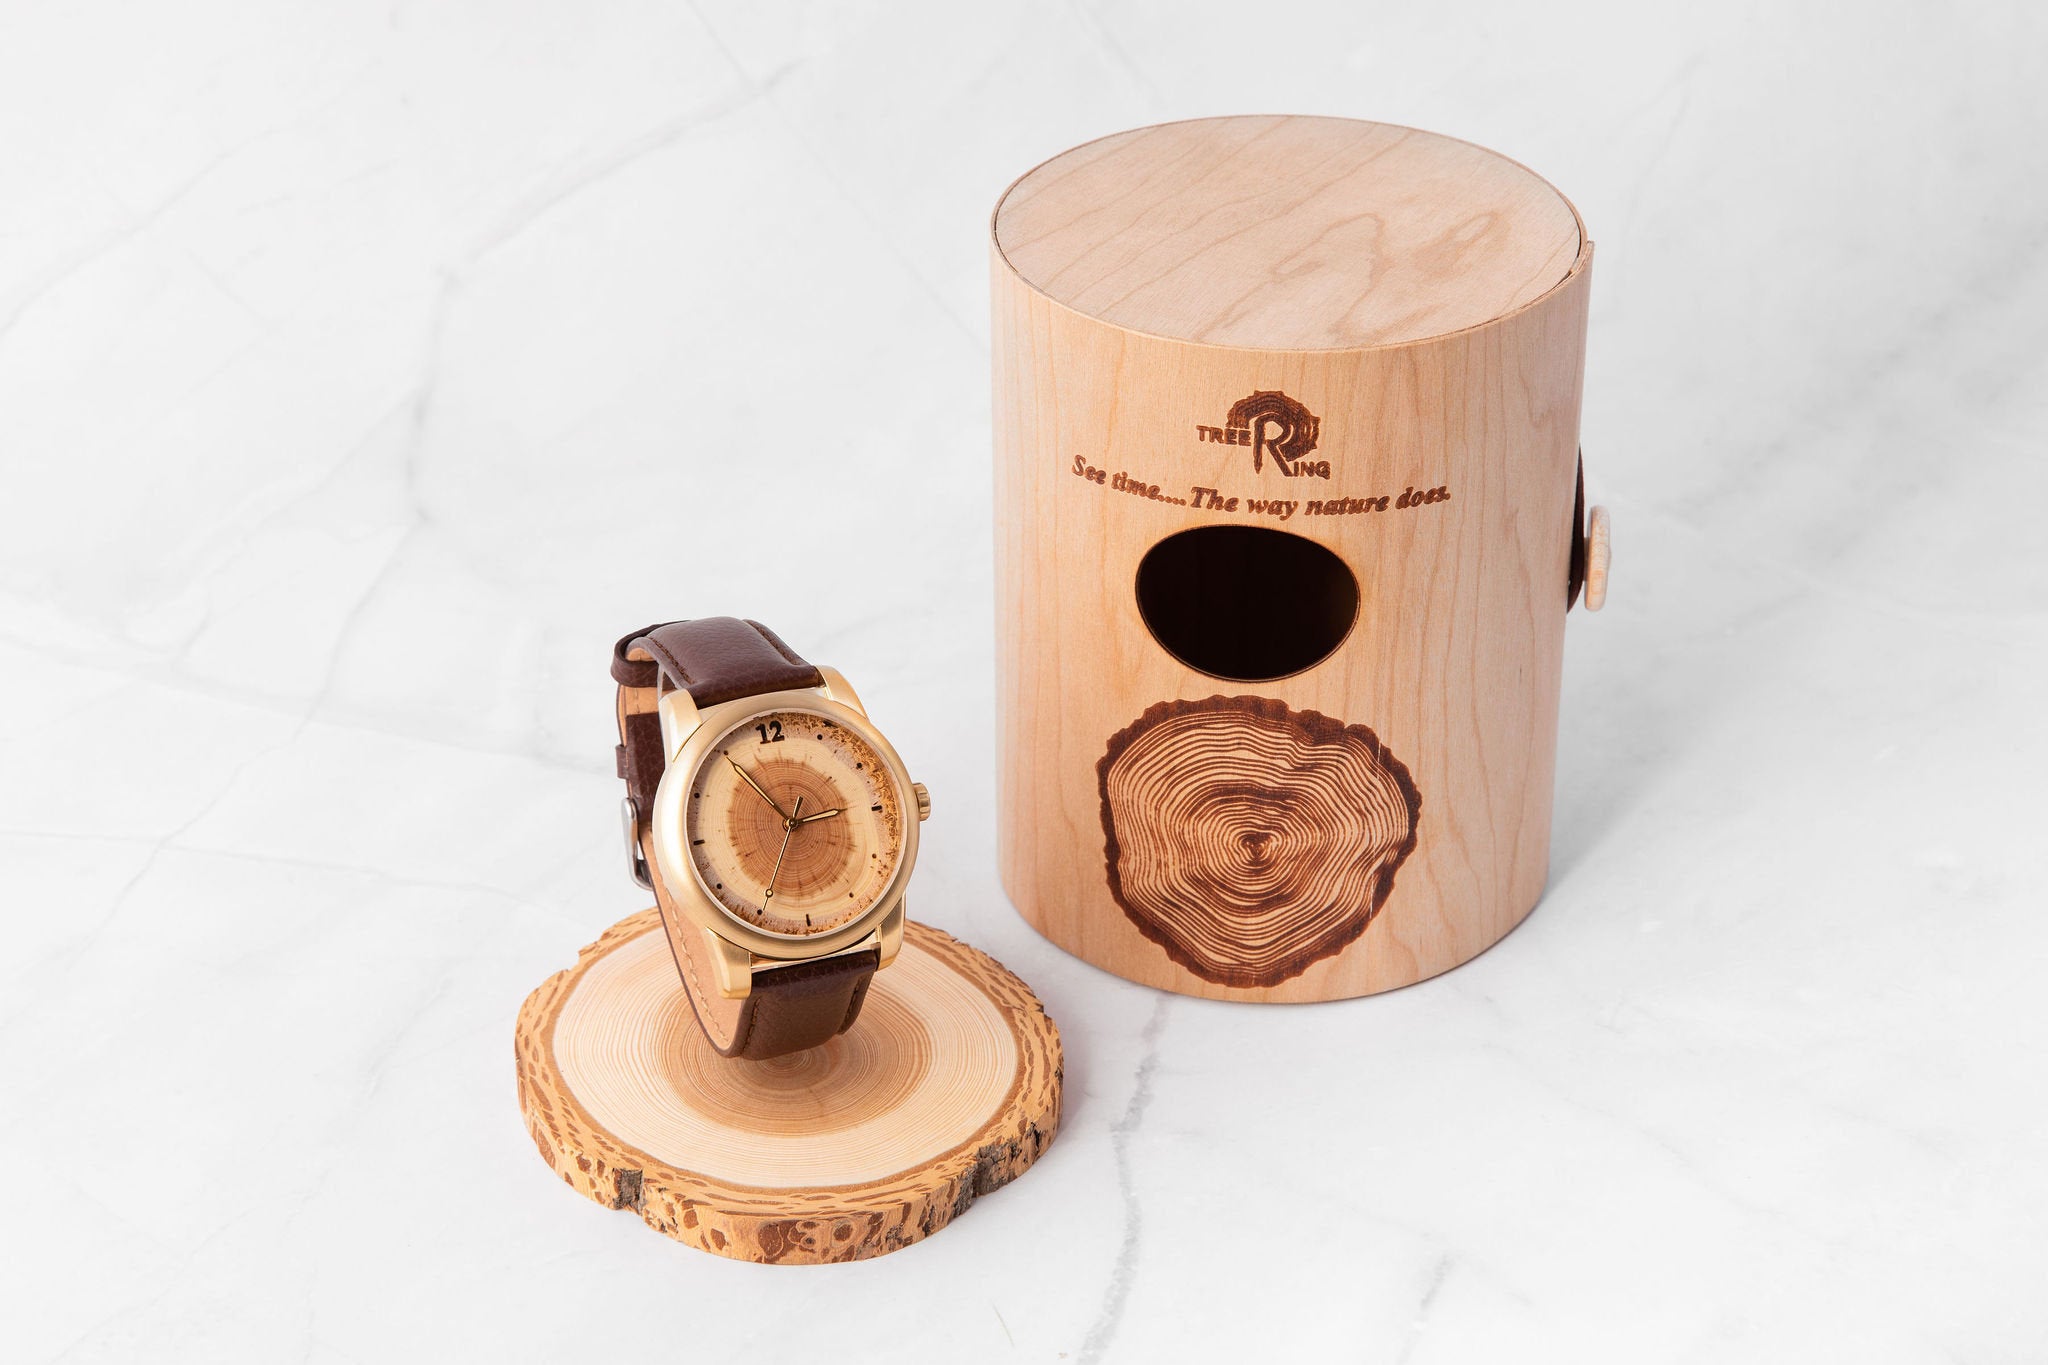 5th Anniversary Gift Wood Watch. Wood Watch Showing Five Annual Tree Rings. Best 5 Year Anniversary Present